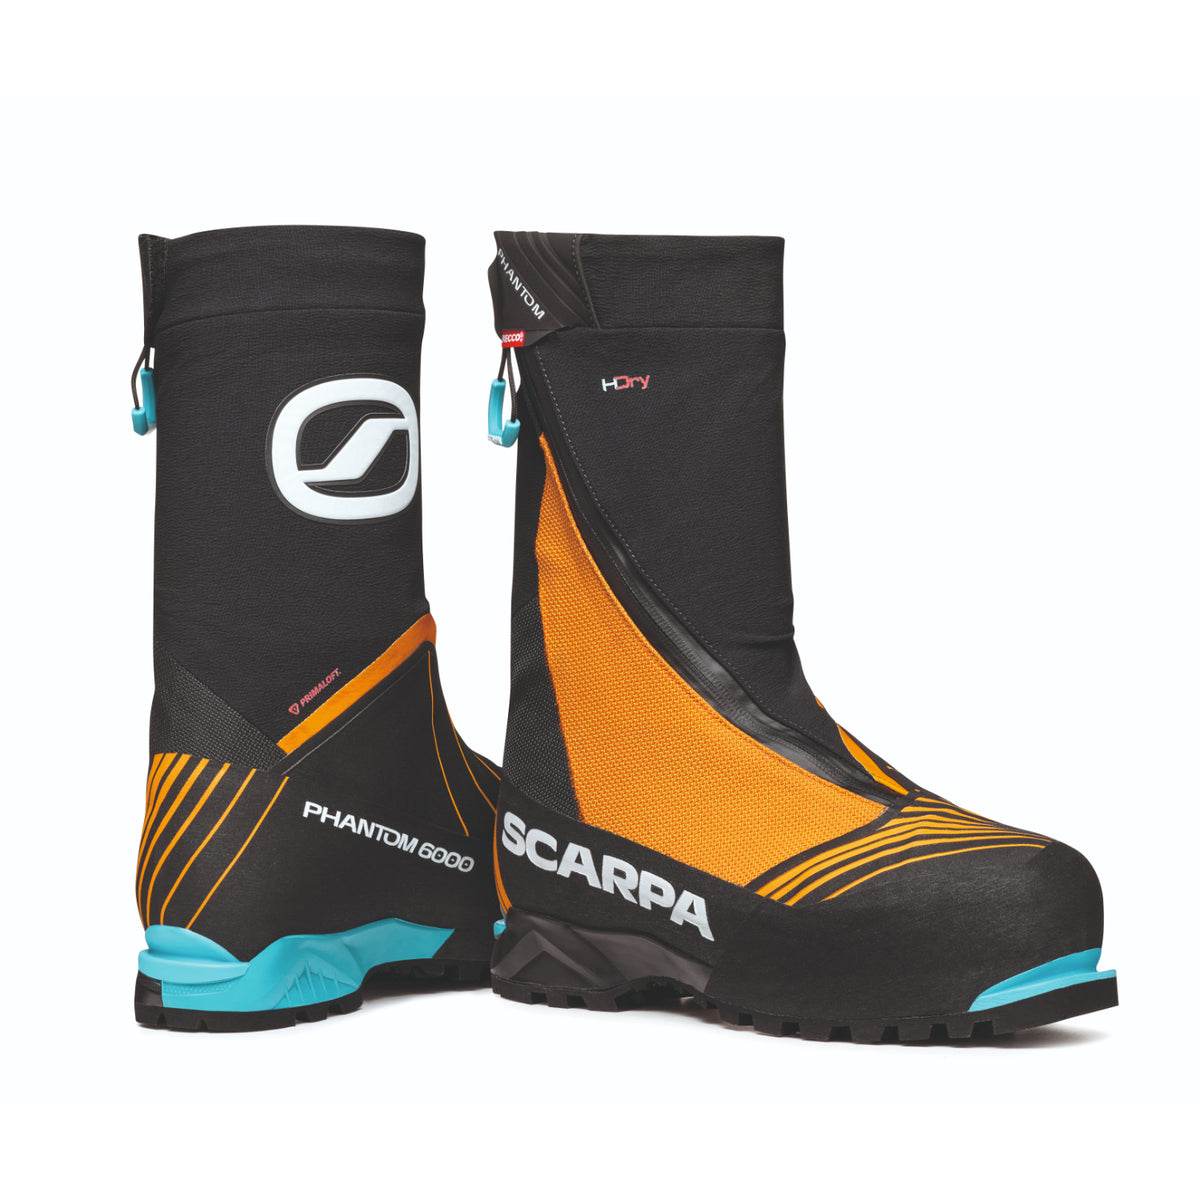 Scarpa Phantom 6000 HD mountaineering boot with Recco technology. Orange and black